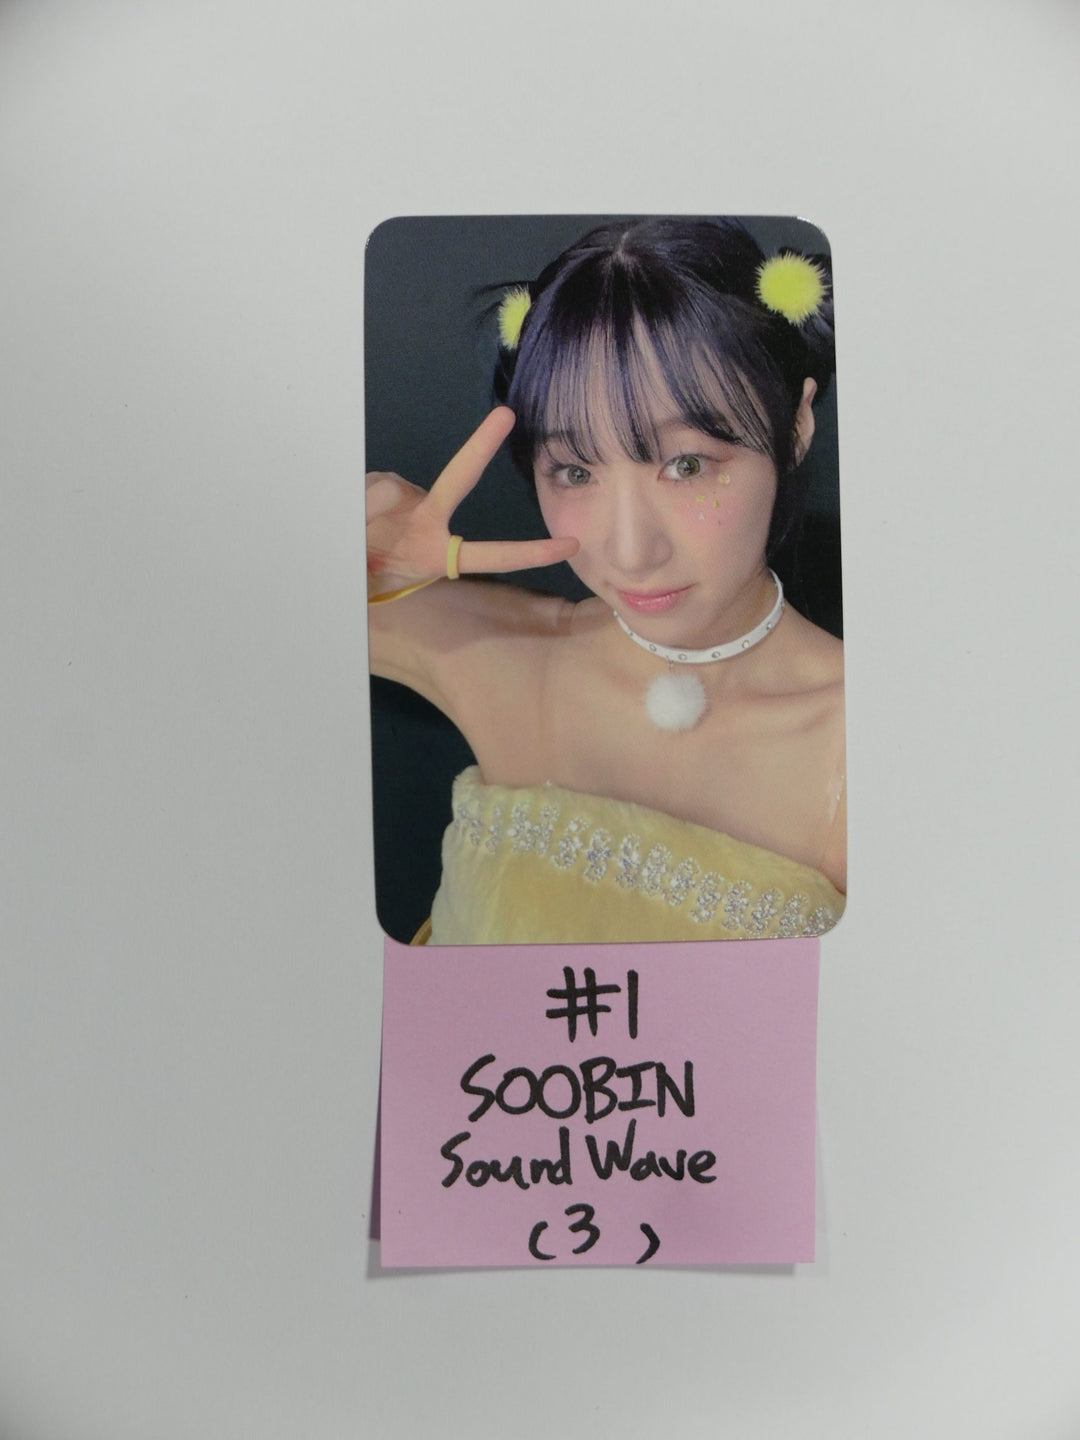 WJSN Chocome "Super Yuppers !" 2nd Single - Soundwave Fansign Event Photocard